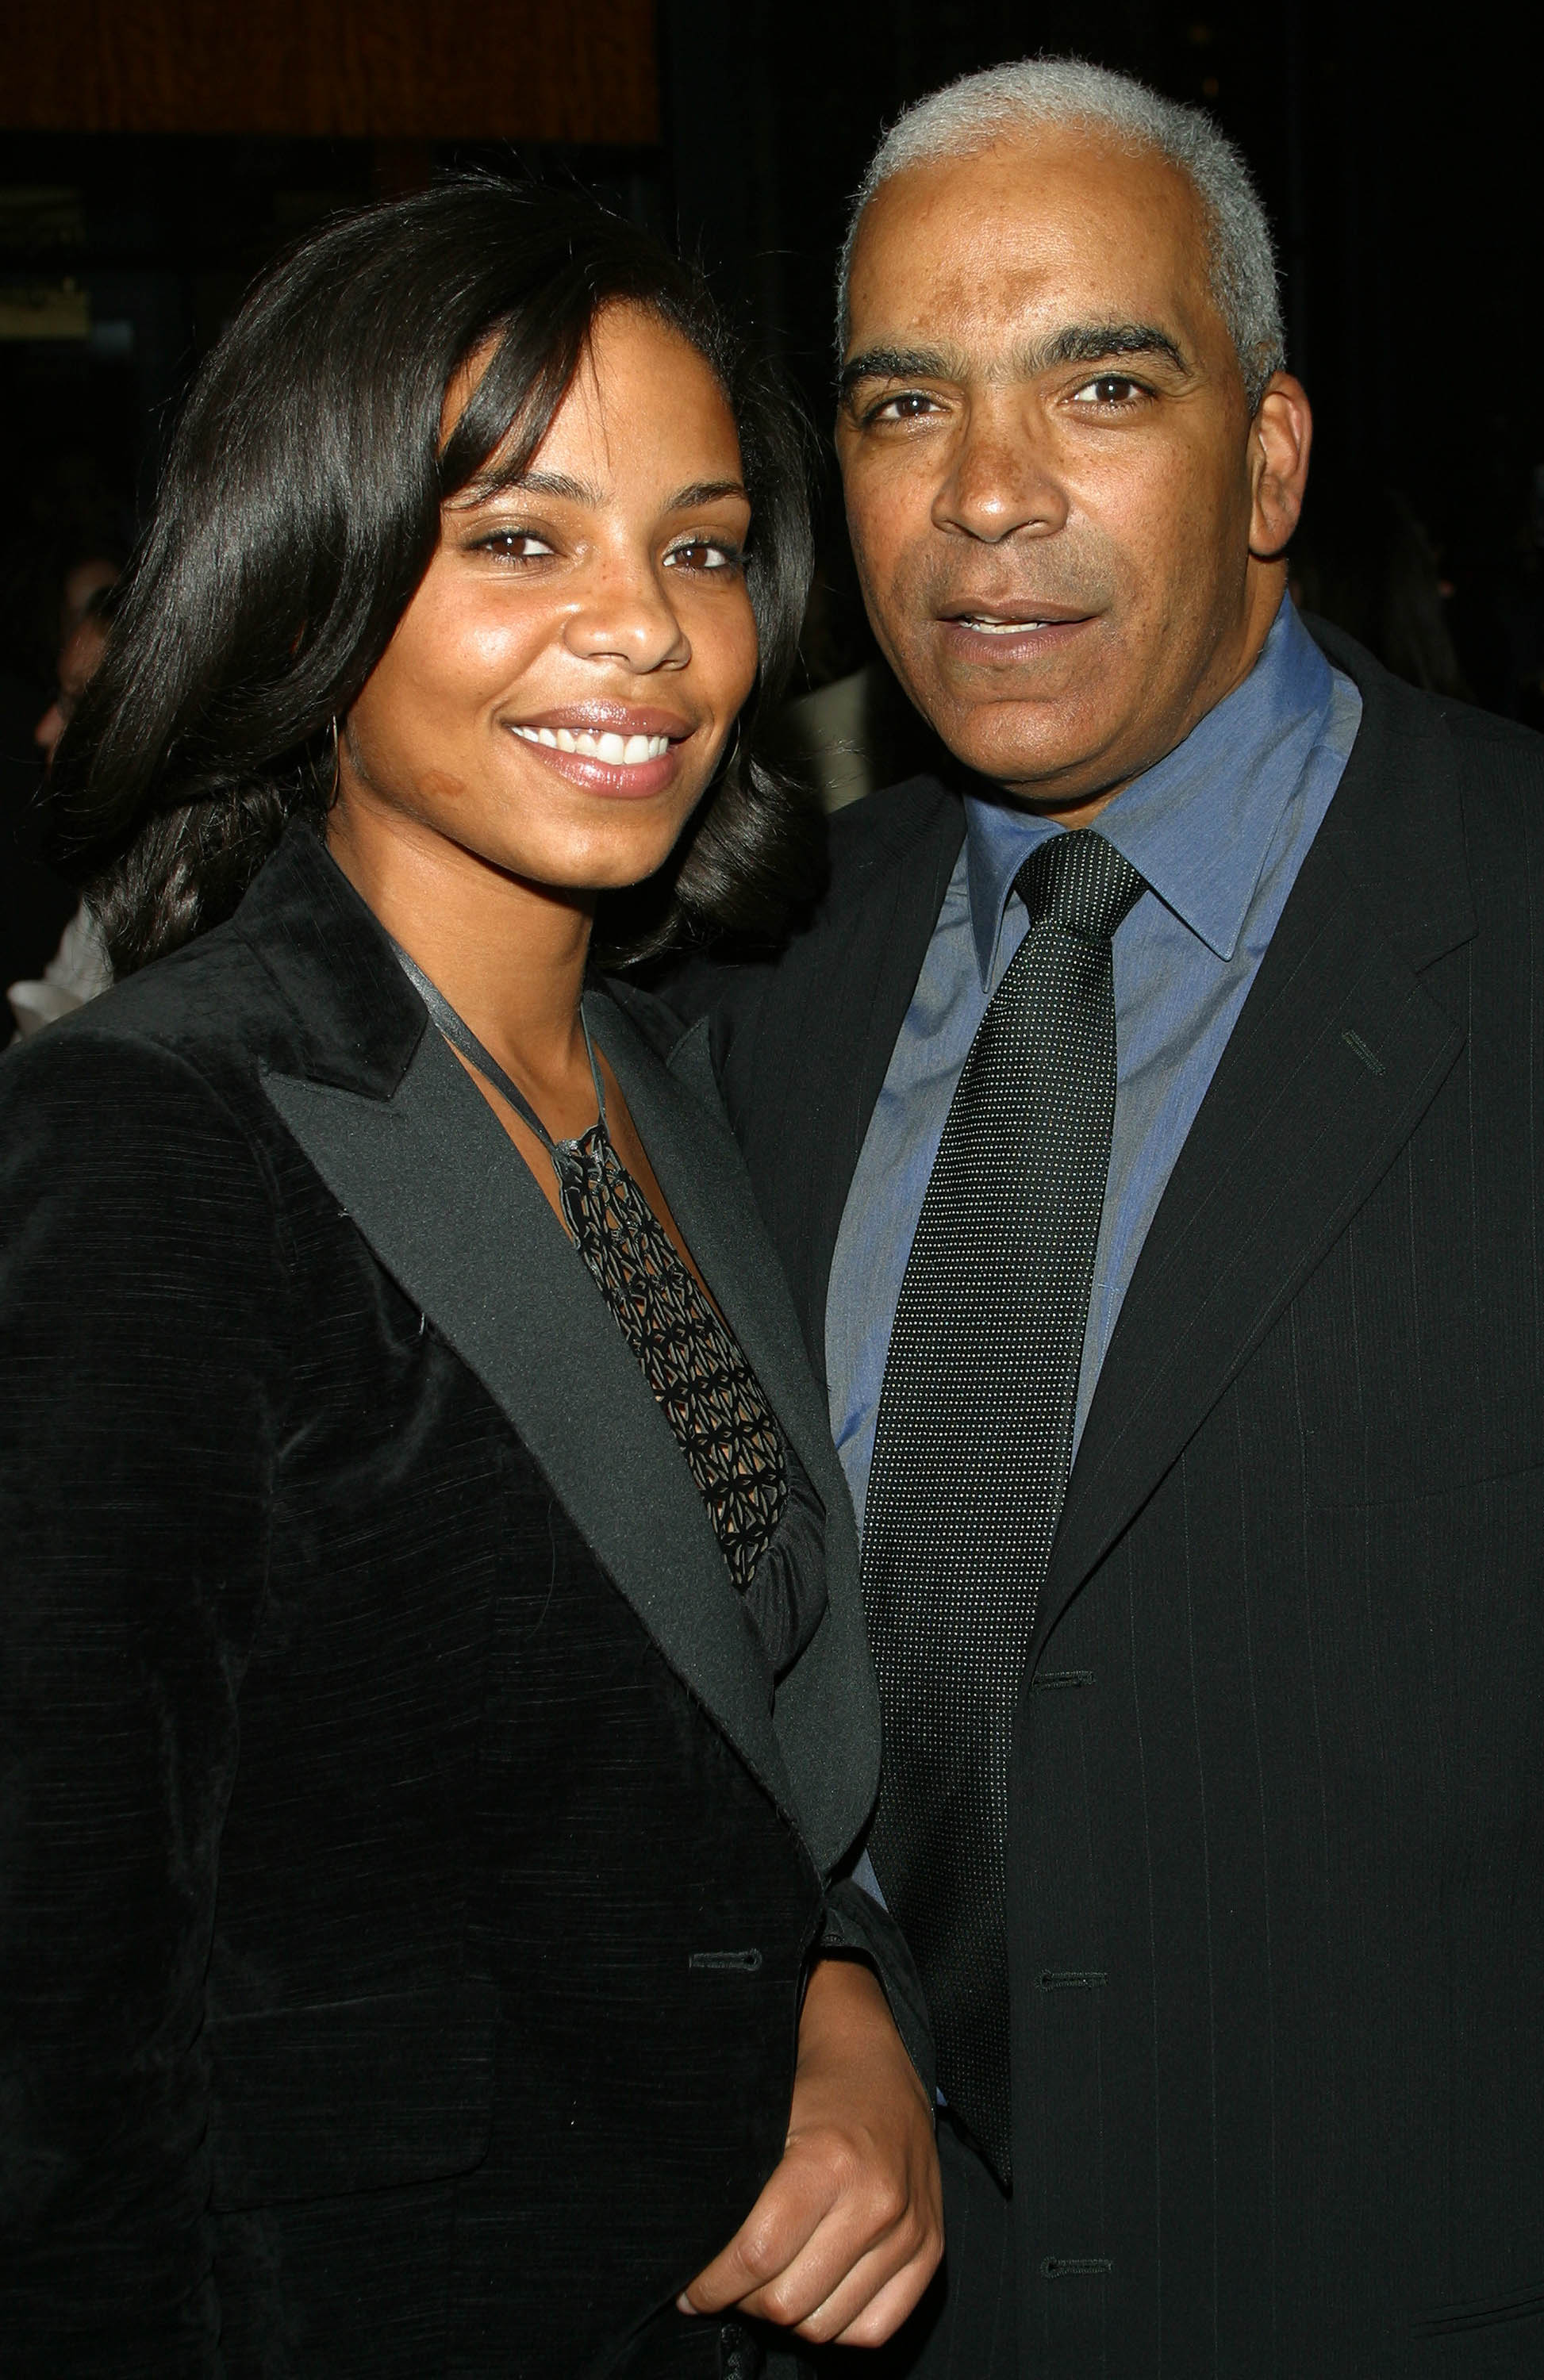 Sanaa Lathan and father Stan Lathan during Russell Simmons's Def Poetry Jam After-Party at Bryant Park Grill in New York, New York, United States.  | Photo: GettyImages